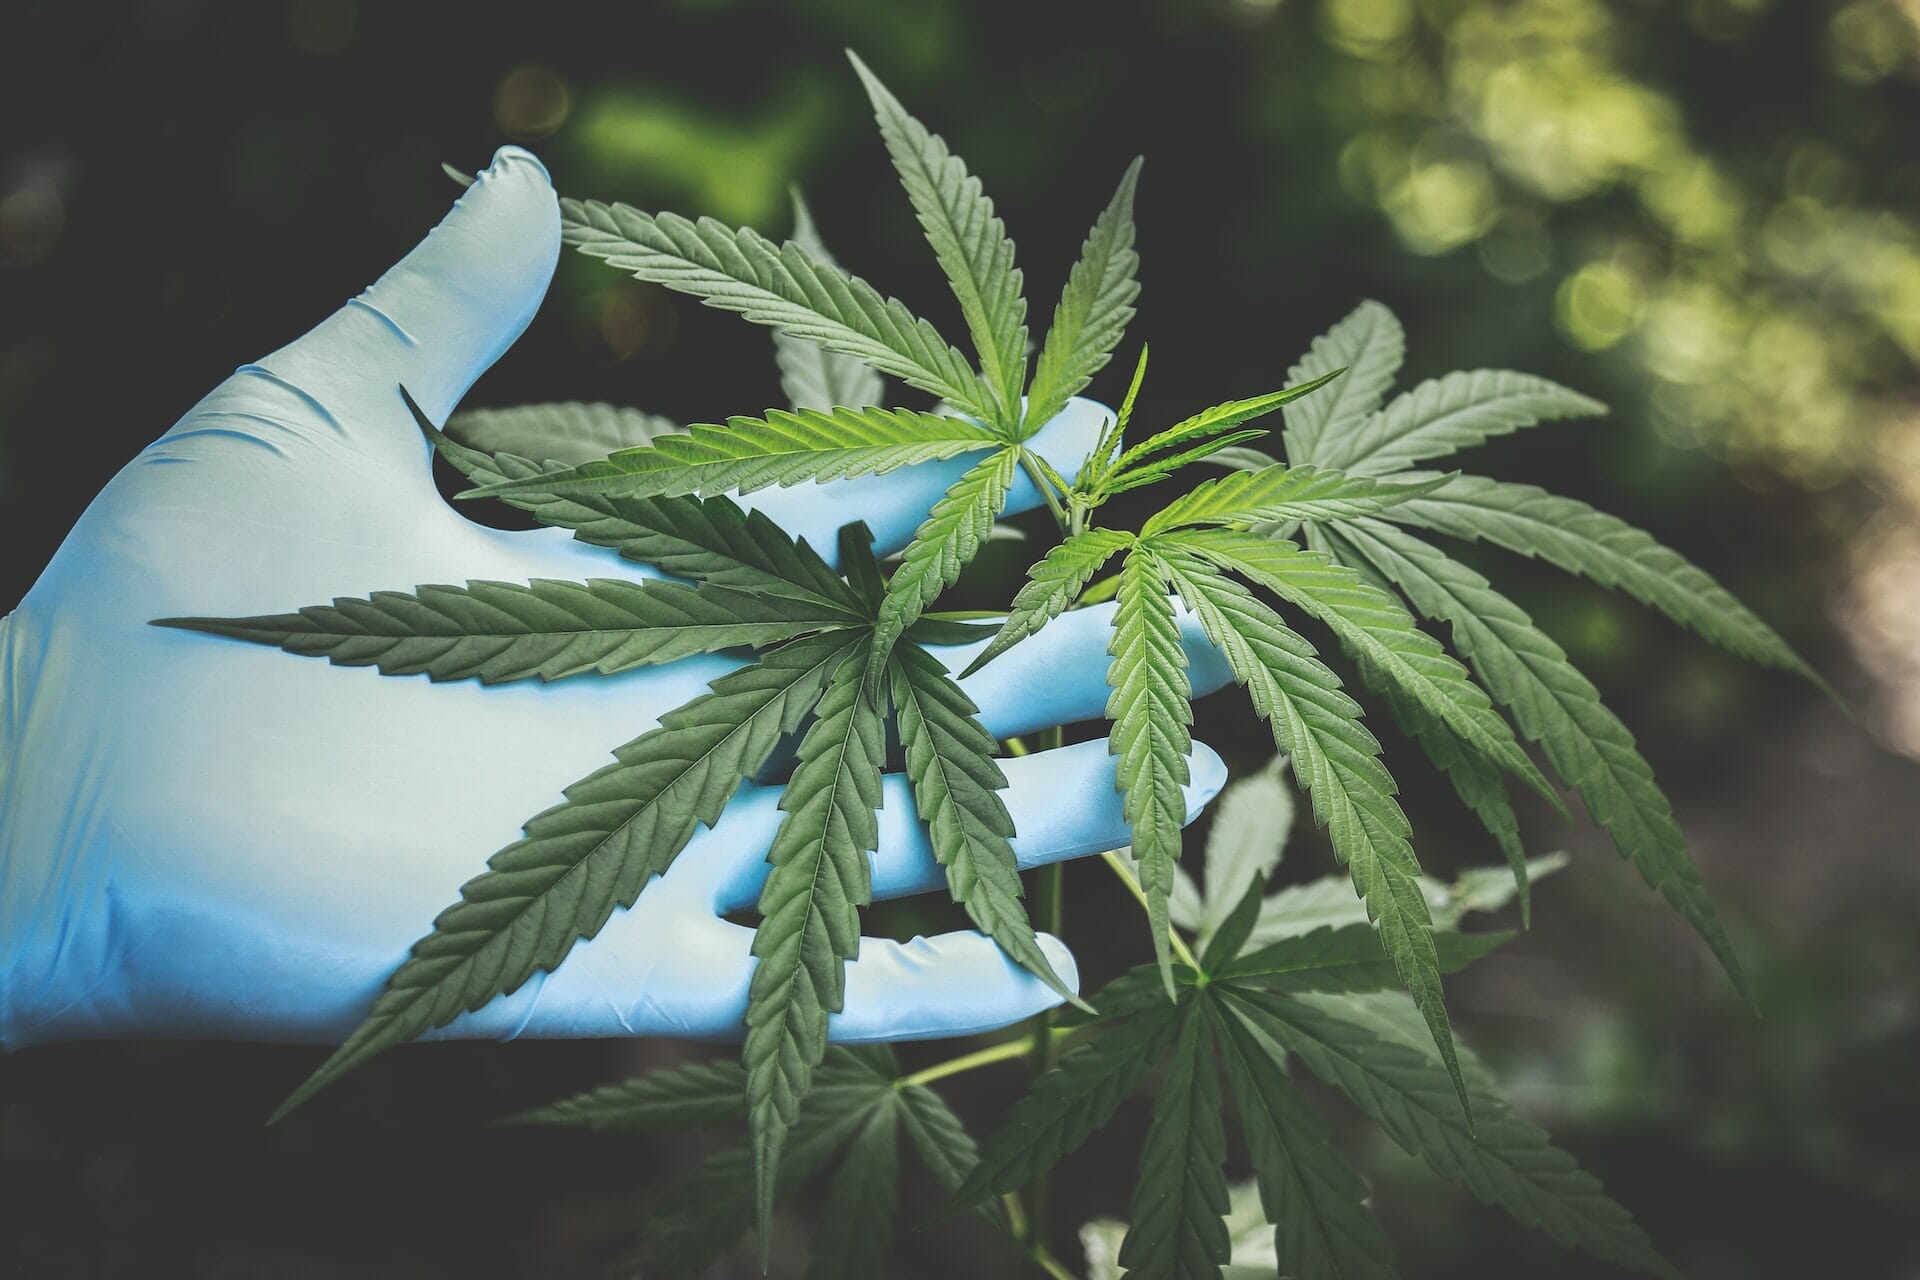 A gloved hand holds a cannabis plant leaf